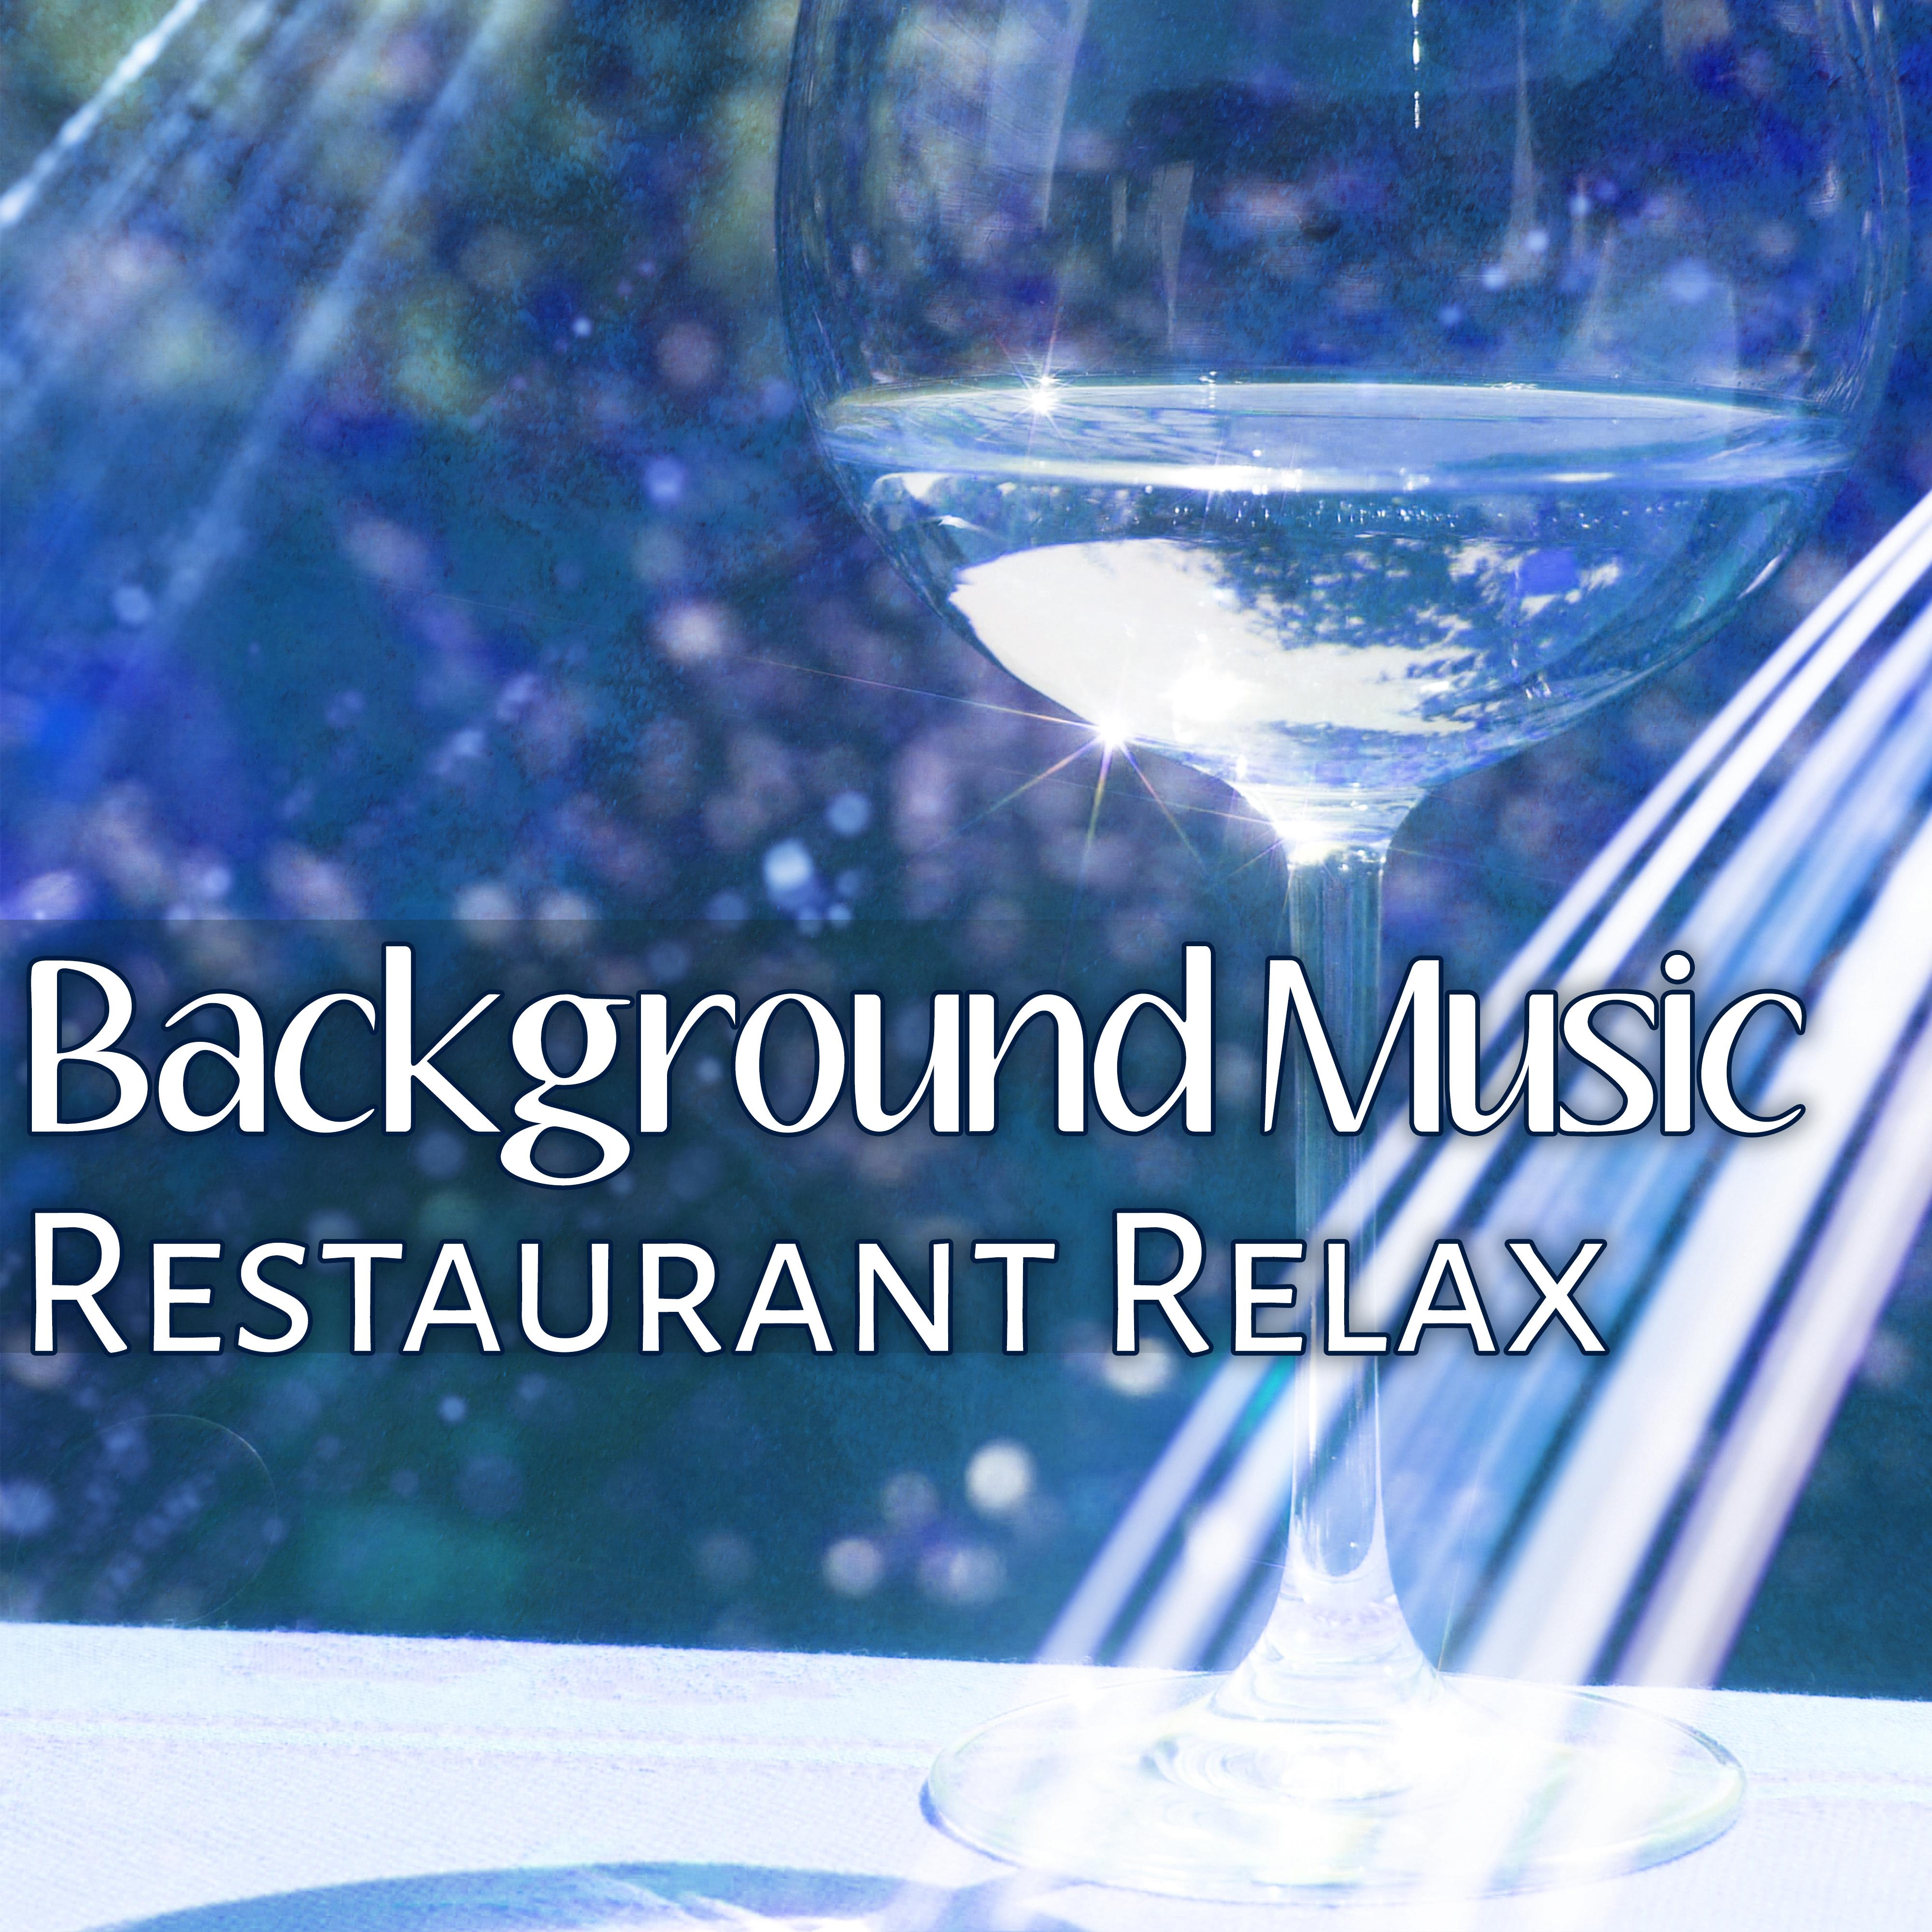 Background Music for Restaurant Relax  Calming Jazz Sounds, Restaurant Music, Easy Listening, Piano Bar, Stress Relief